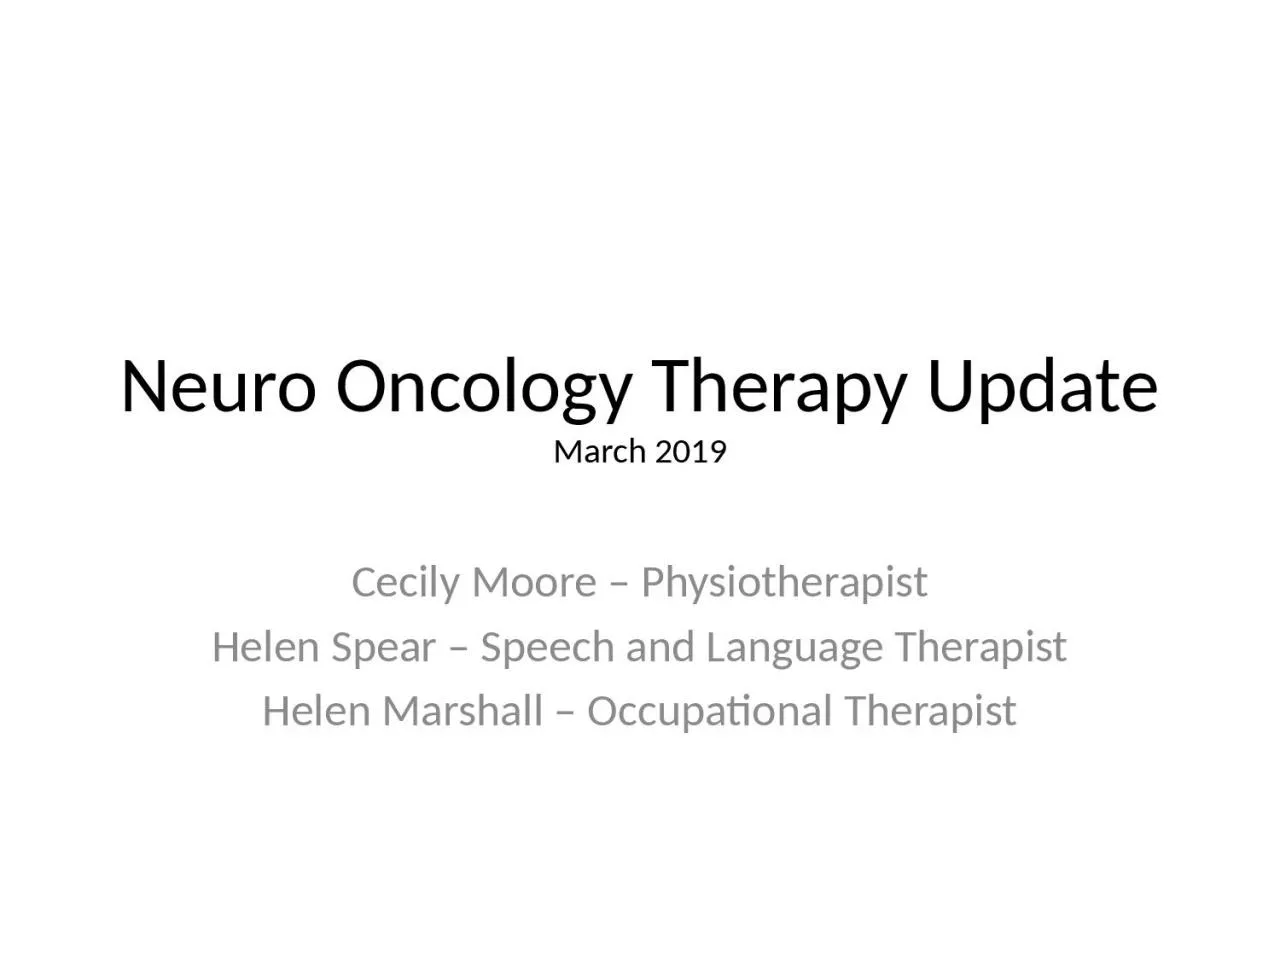 Neuro Oncology Therapy Update